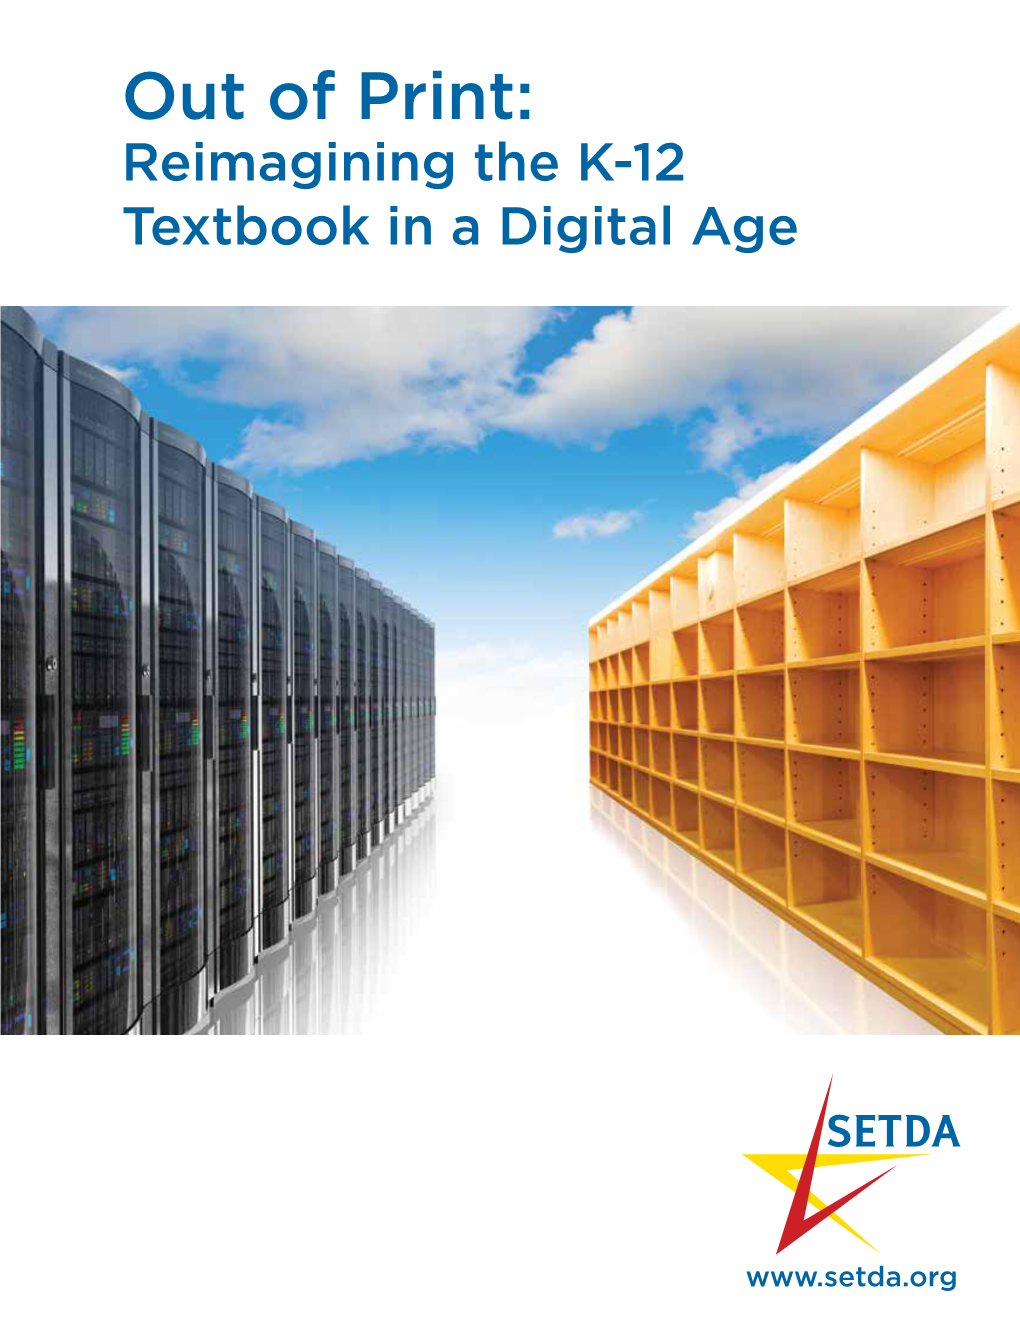 Out of Print Reimagining the K-12 Textbook in the Digital